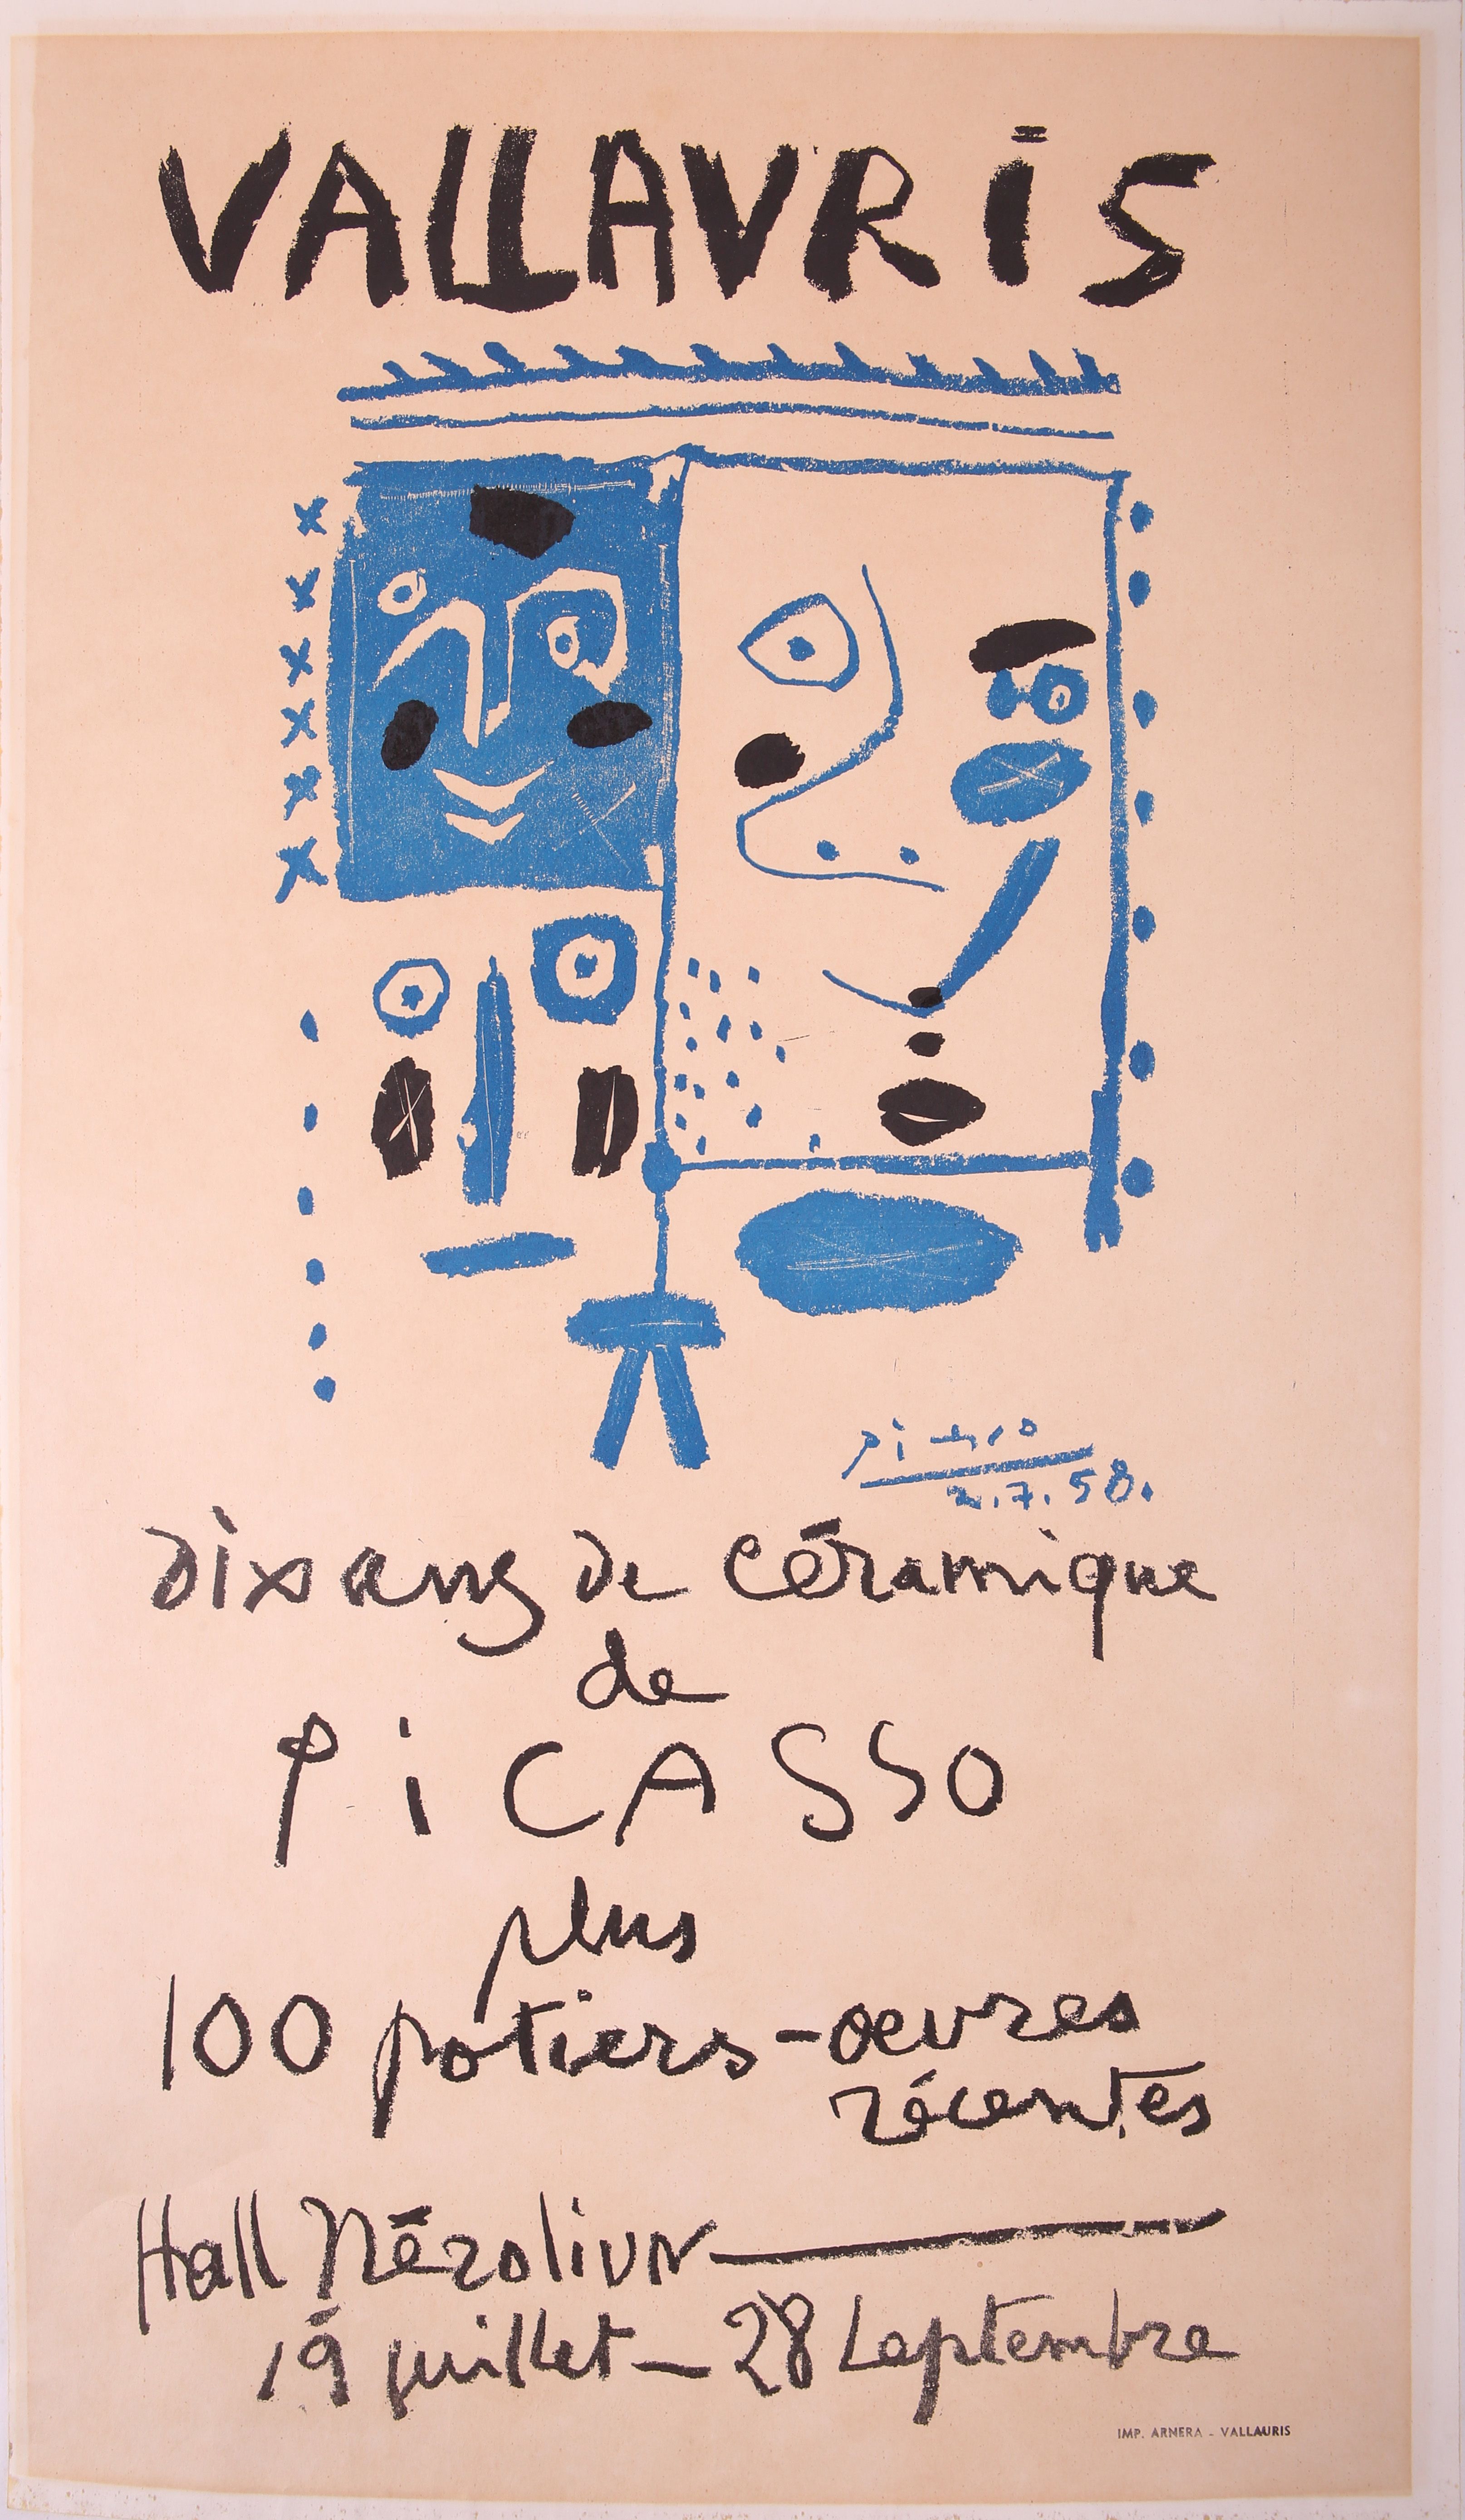 Pablo Picasso (1881-1973), "Owl, Glass and Flower - Galerie 65, Cannes", lithograph printed in